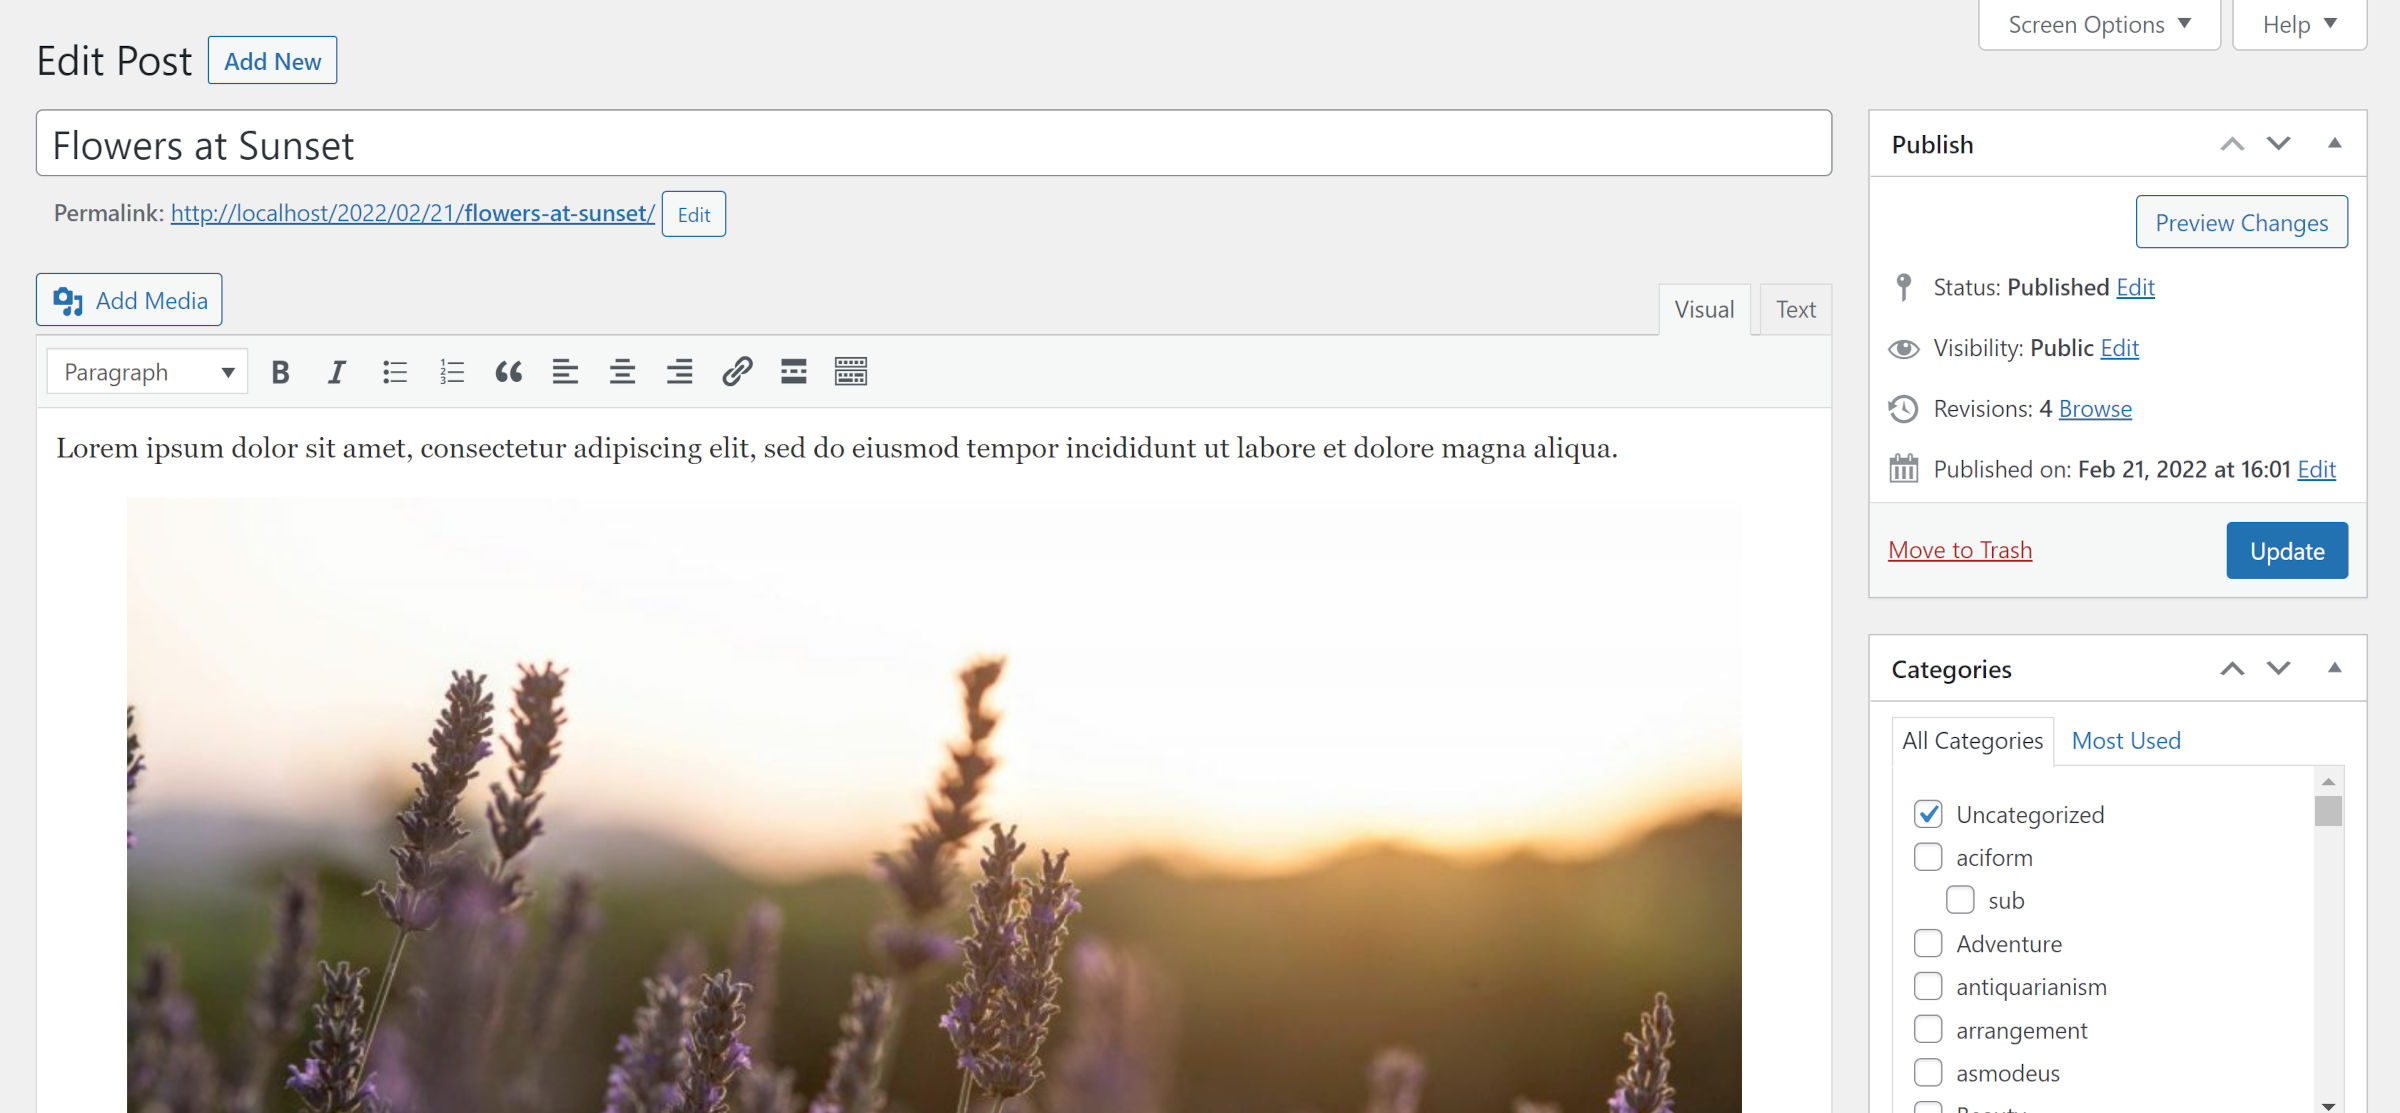 Classic WordPress editor with a faux post and image of flowers.